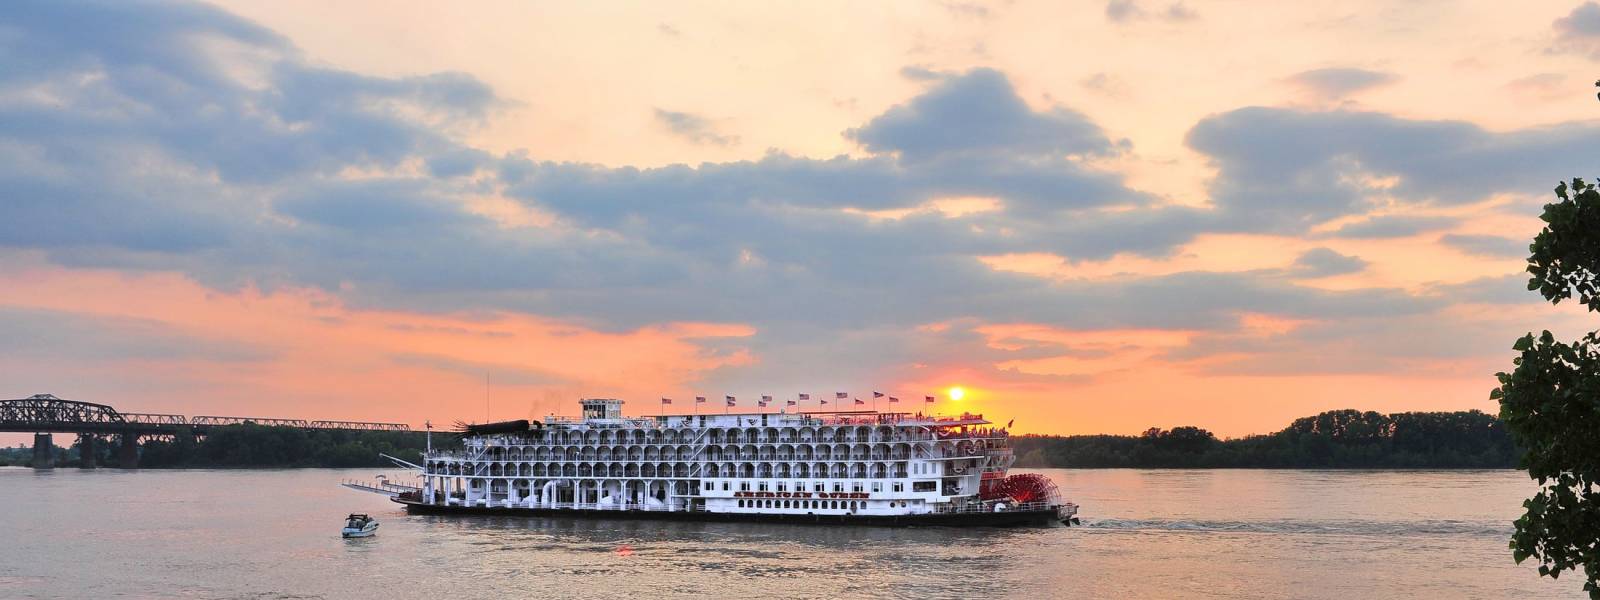 mississippi river cruises from memphis to new orleans